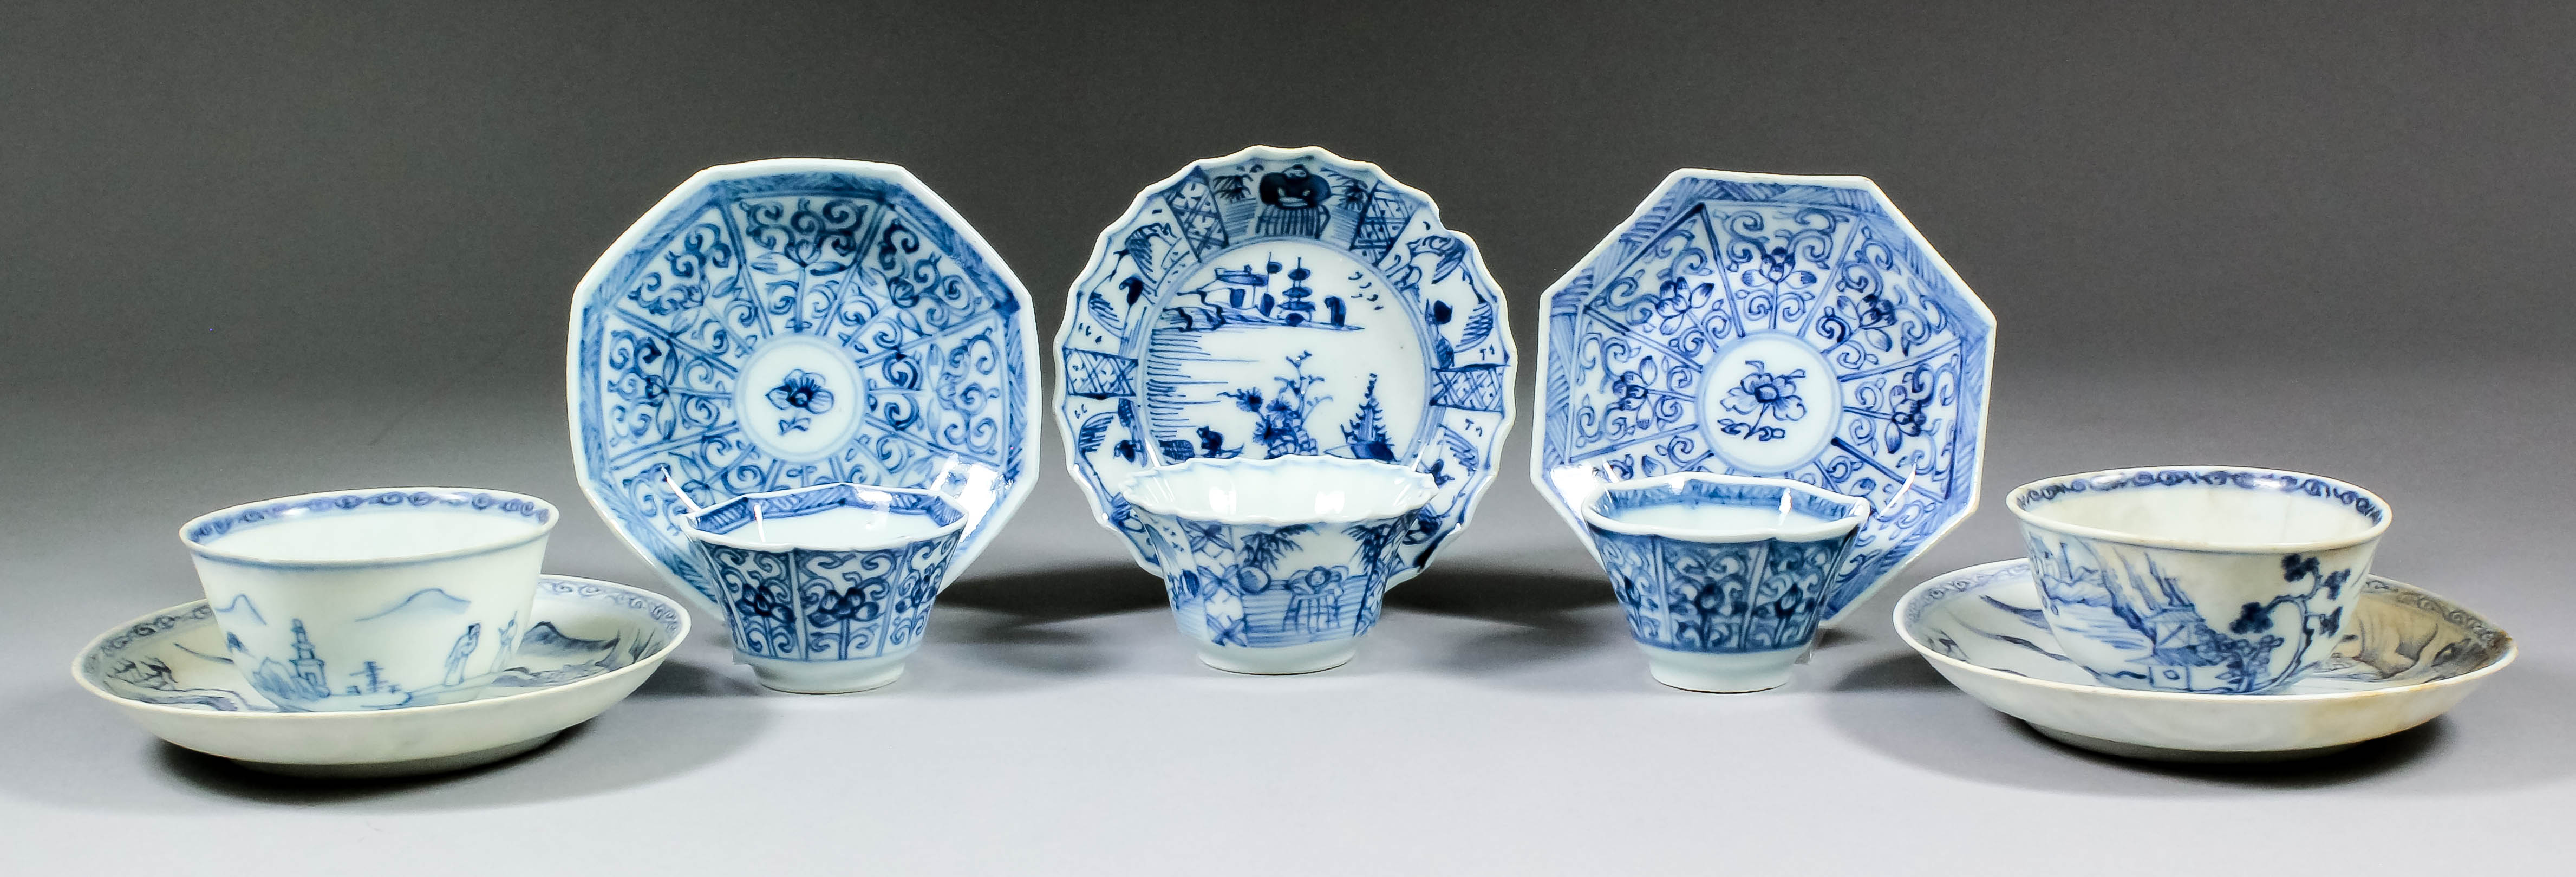 A small collection of early 18th Century Chinese blue and white porcelain from the Ca Mau wreck,